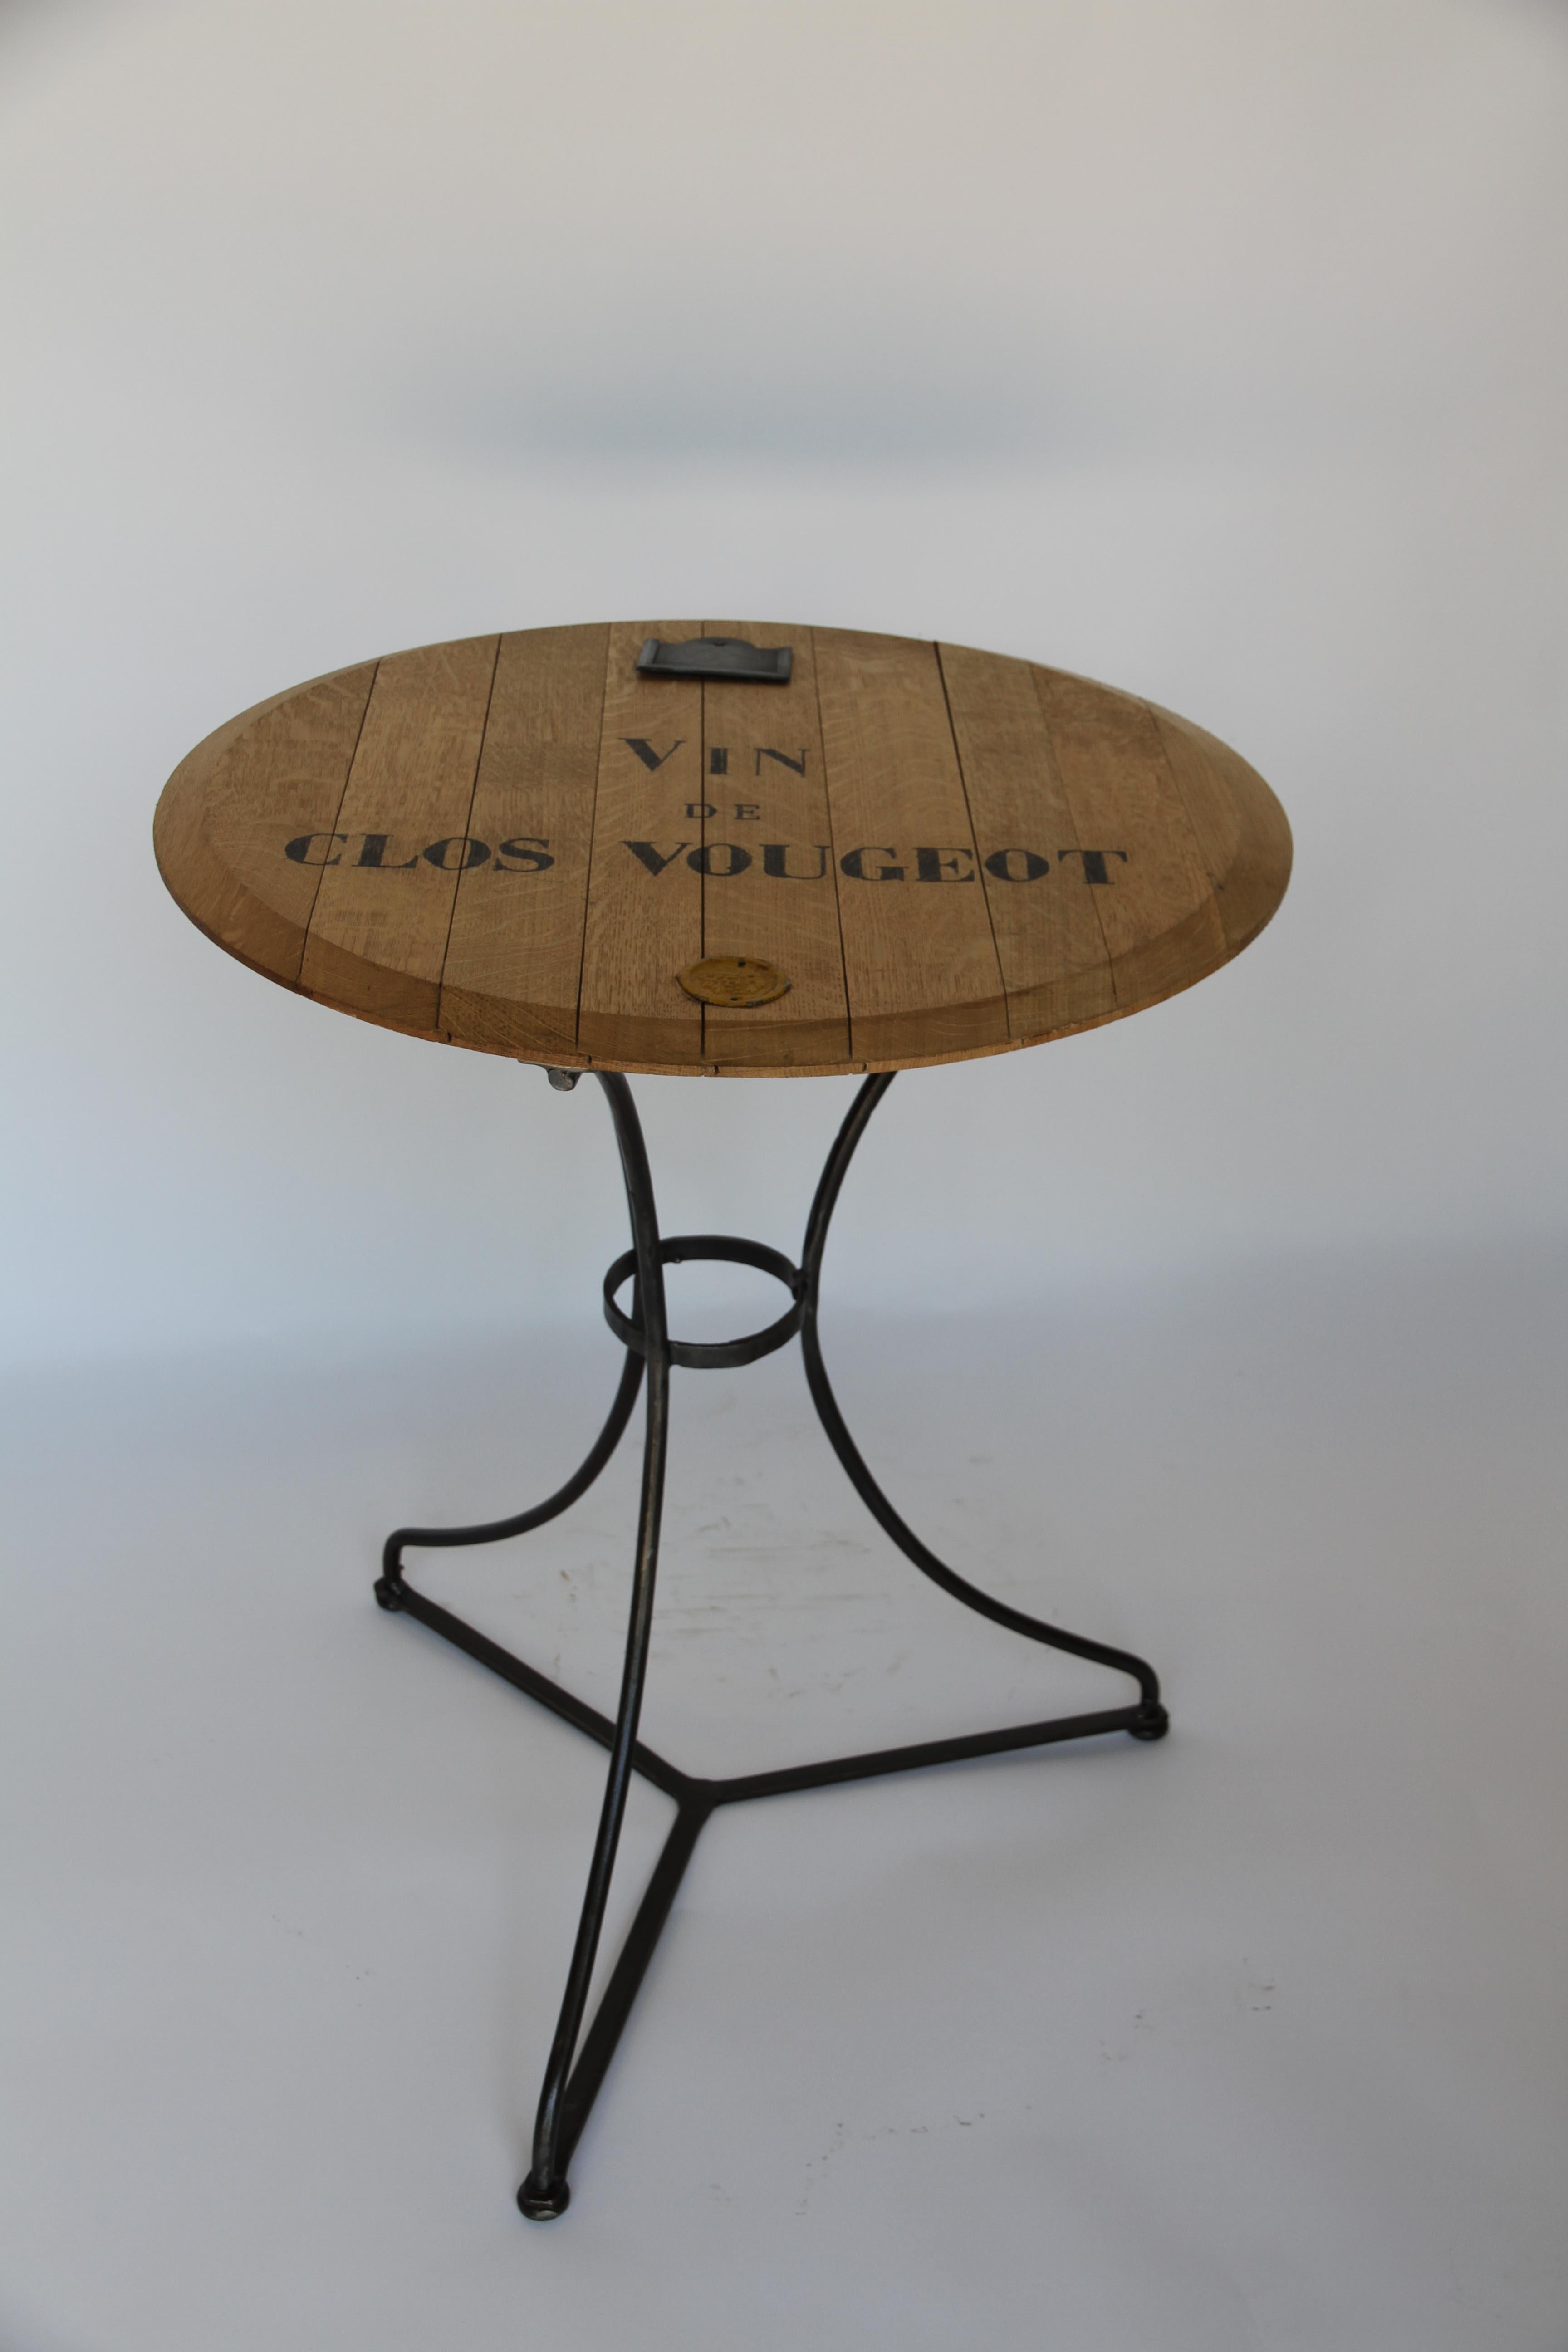 For the wine enthusiast, a custom-made table from a French wine barrel facade. A great addition to your wine room.